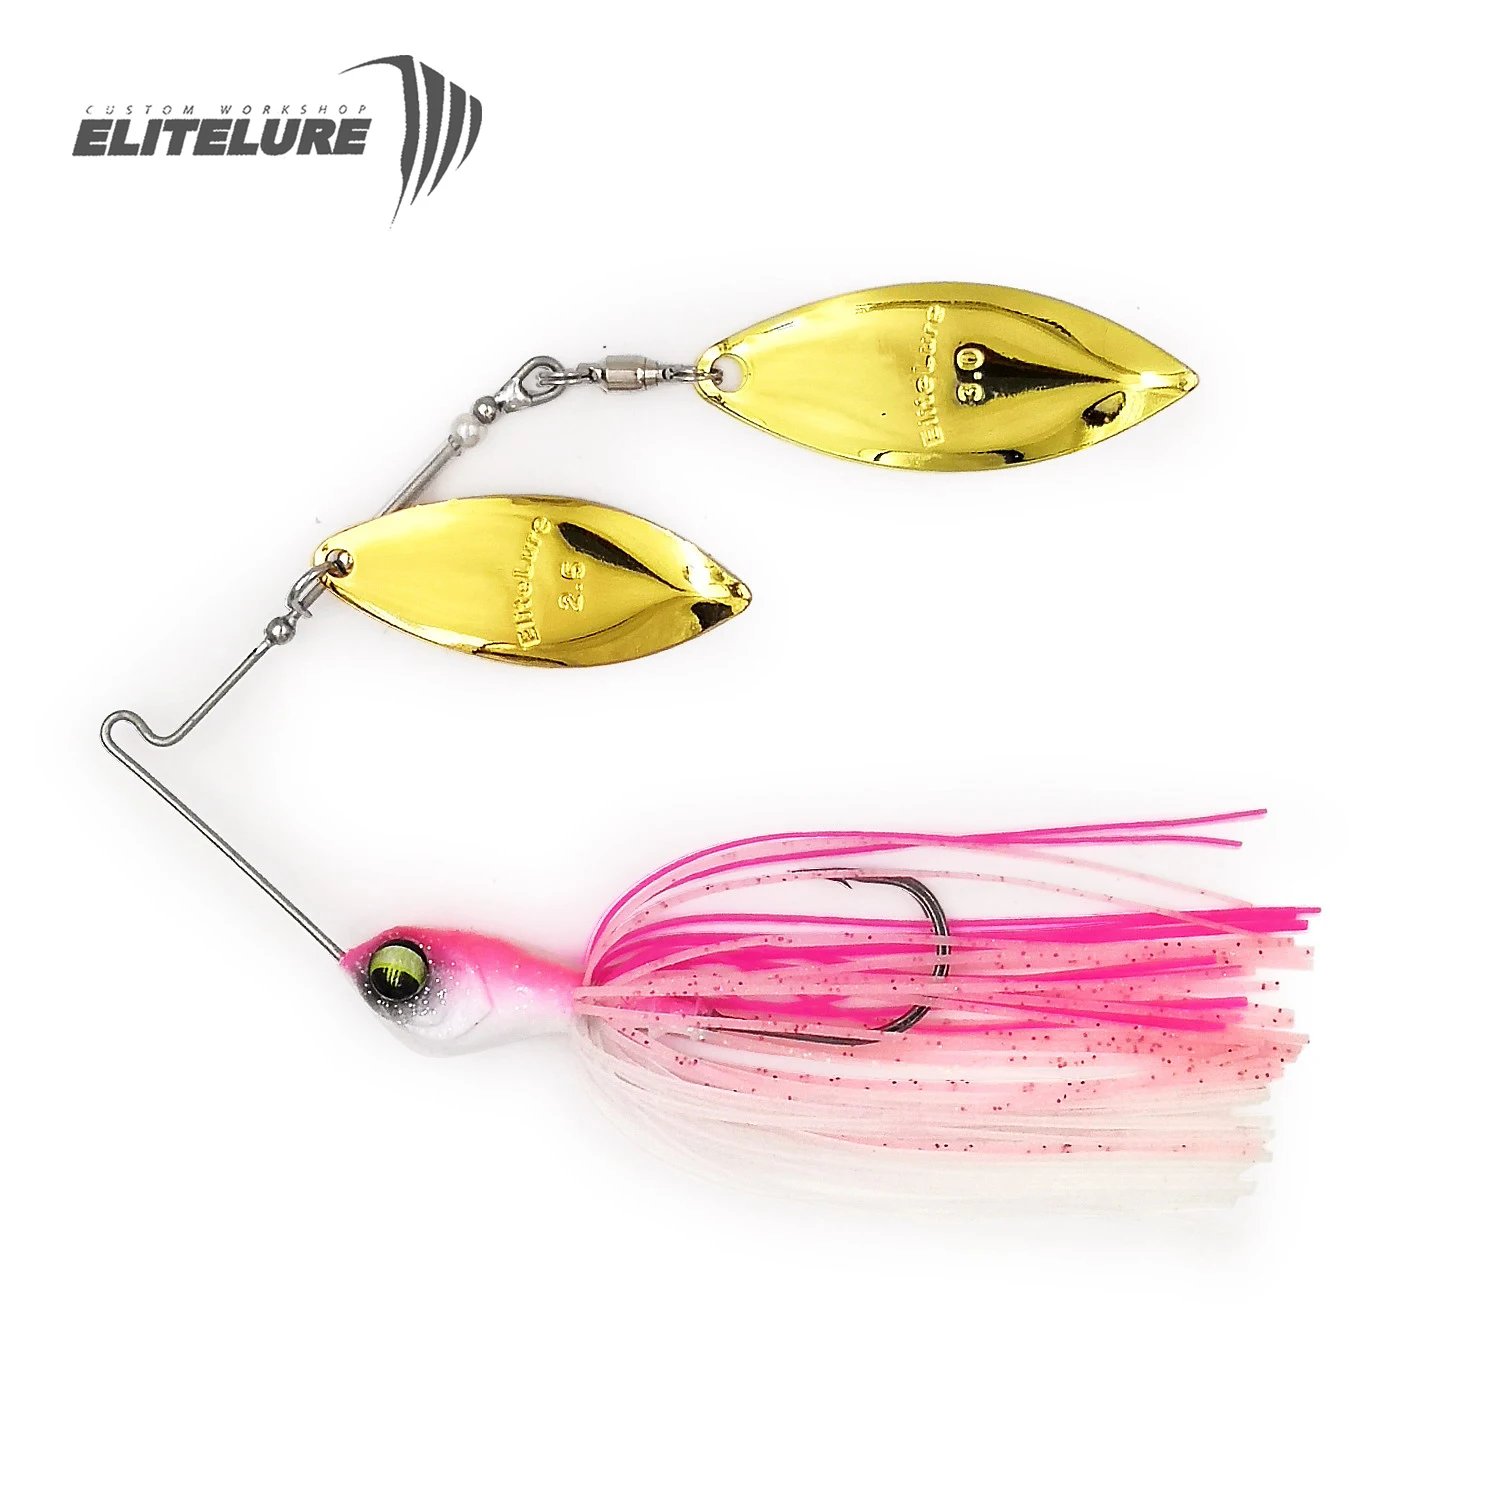 New ELITELURE Rubber Skirt Jig 10/14gSpinner Bait Spinning Lure Metal Spoon Wobbler With Barbed Hook For Bass Trout Pike Fishing | Спорт и